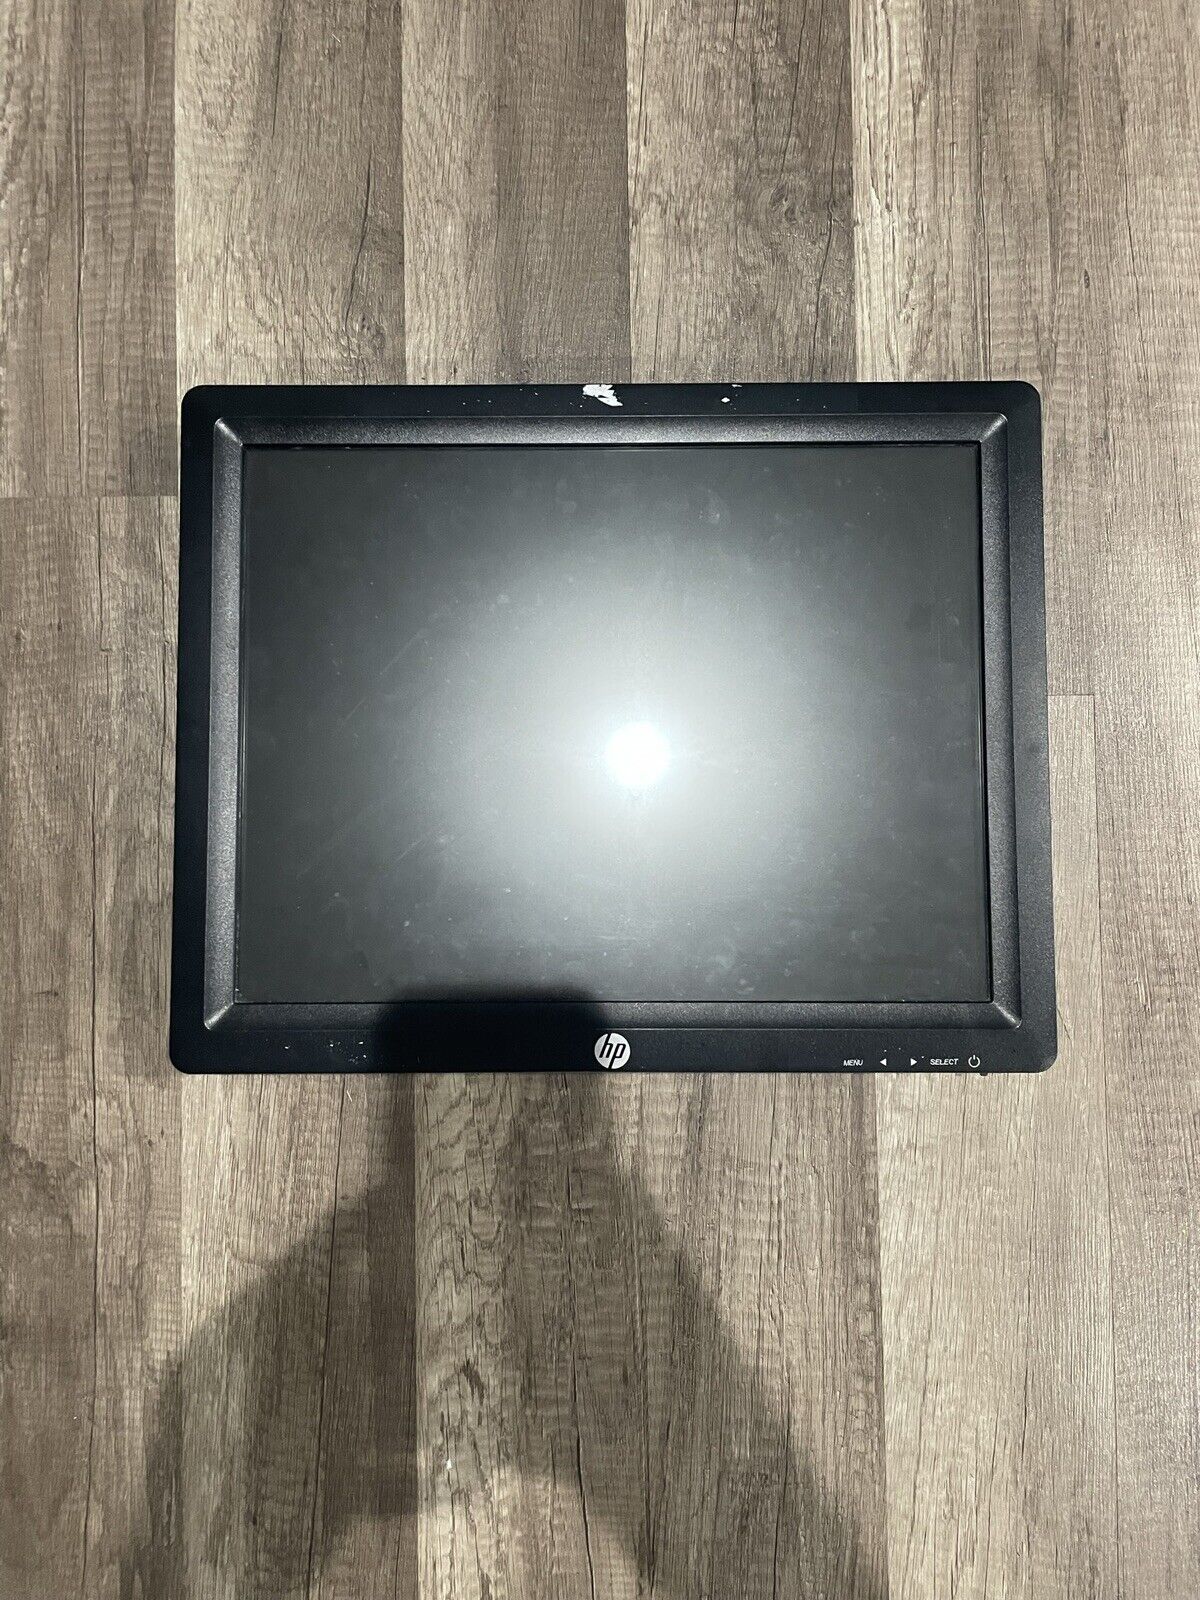 HP L5015tm 15-inch Retail Touch Monitor (M1F94AA) Comes With Brackets And Wires